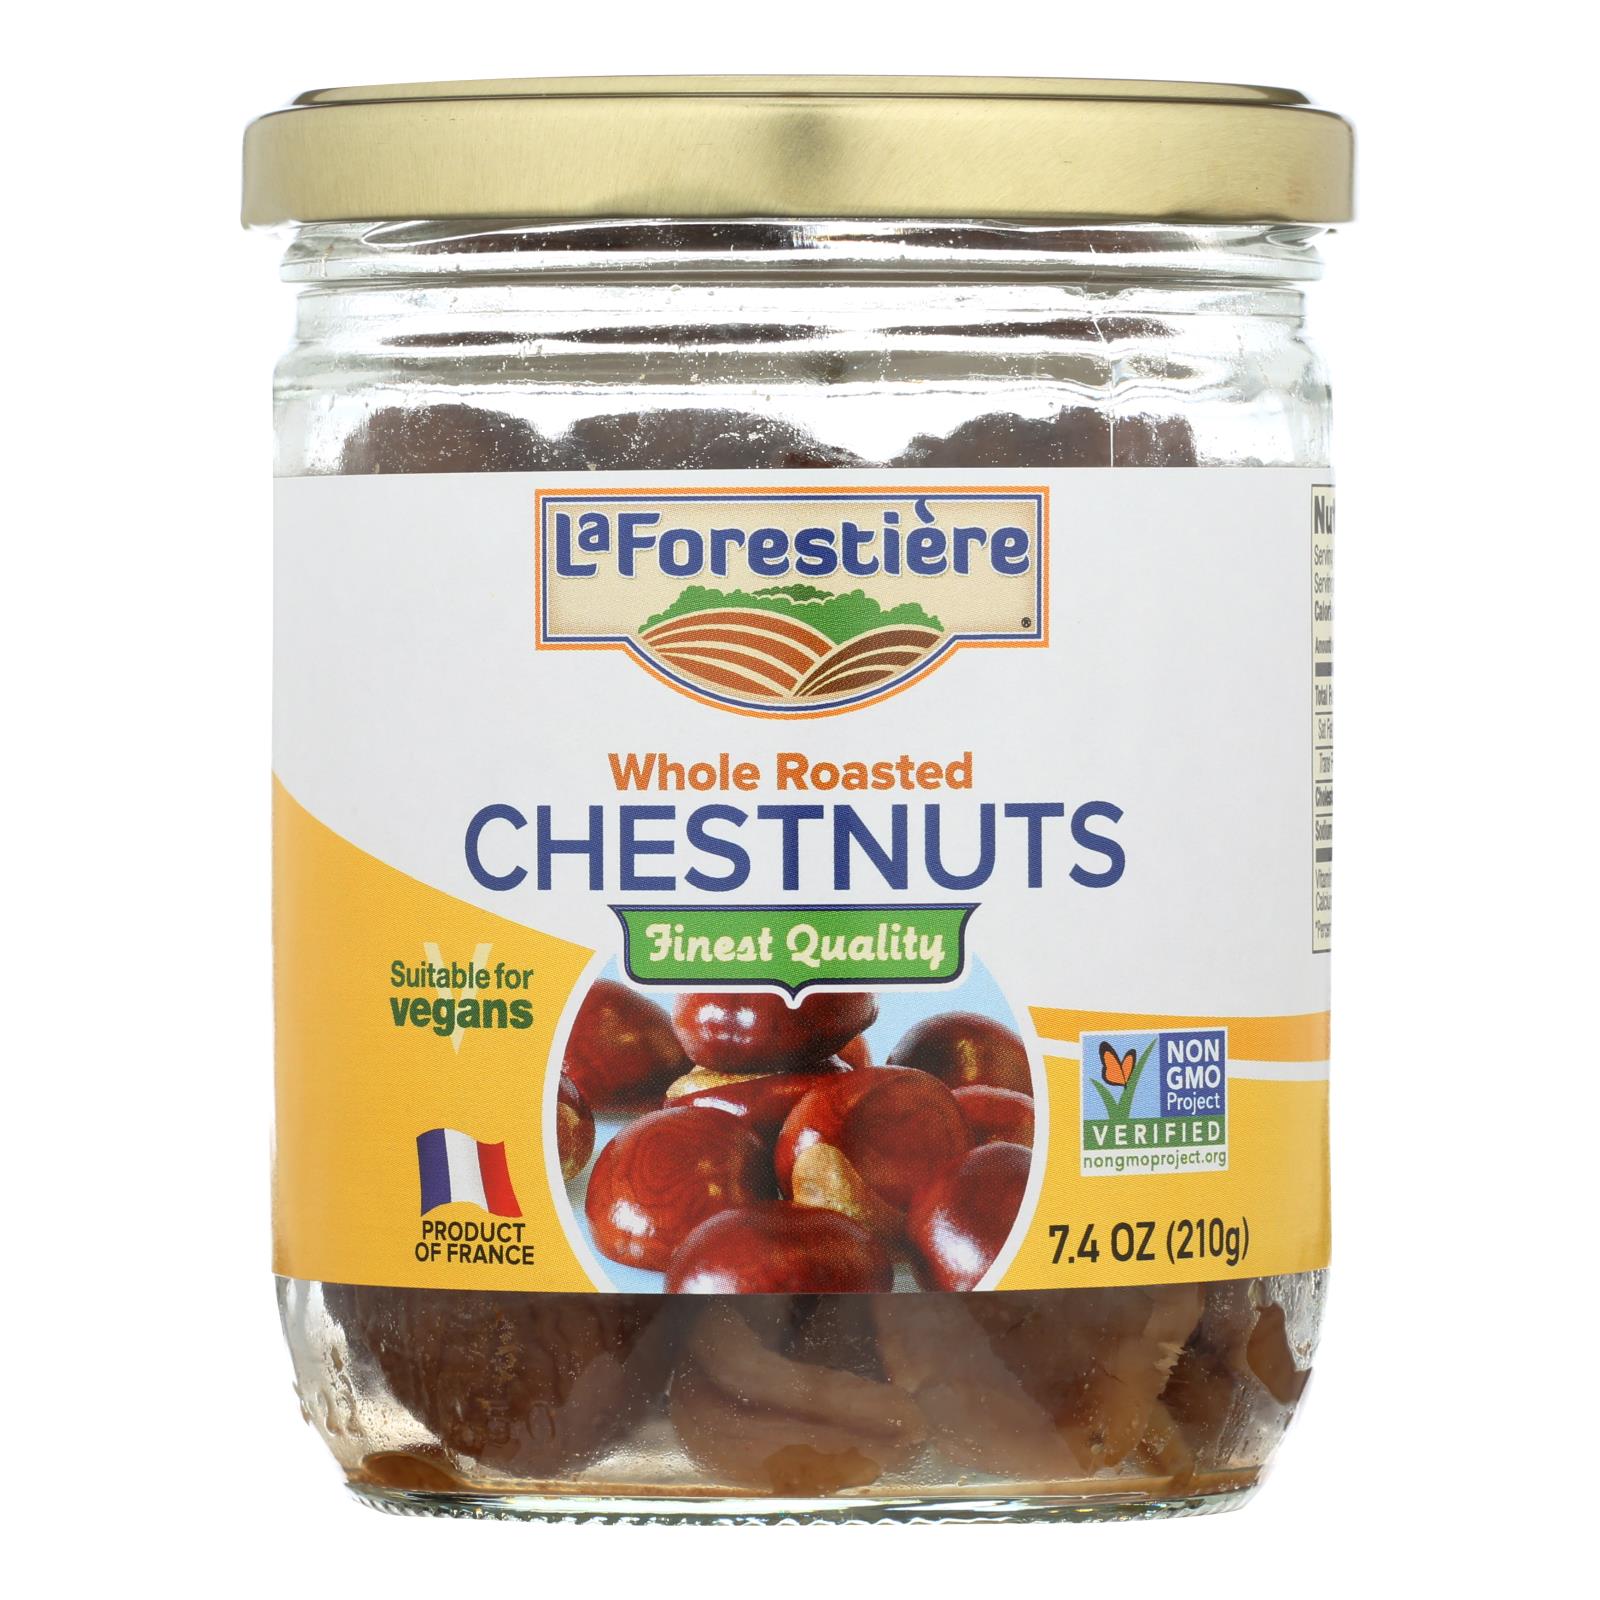 La Forestiere's Whole Roasted Chestnuts - 12개 묶음상품 - 7.4 OZ